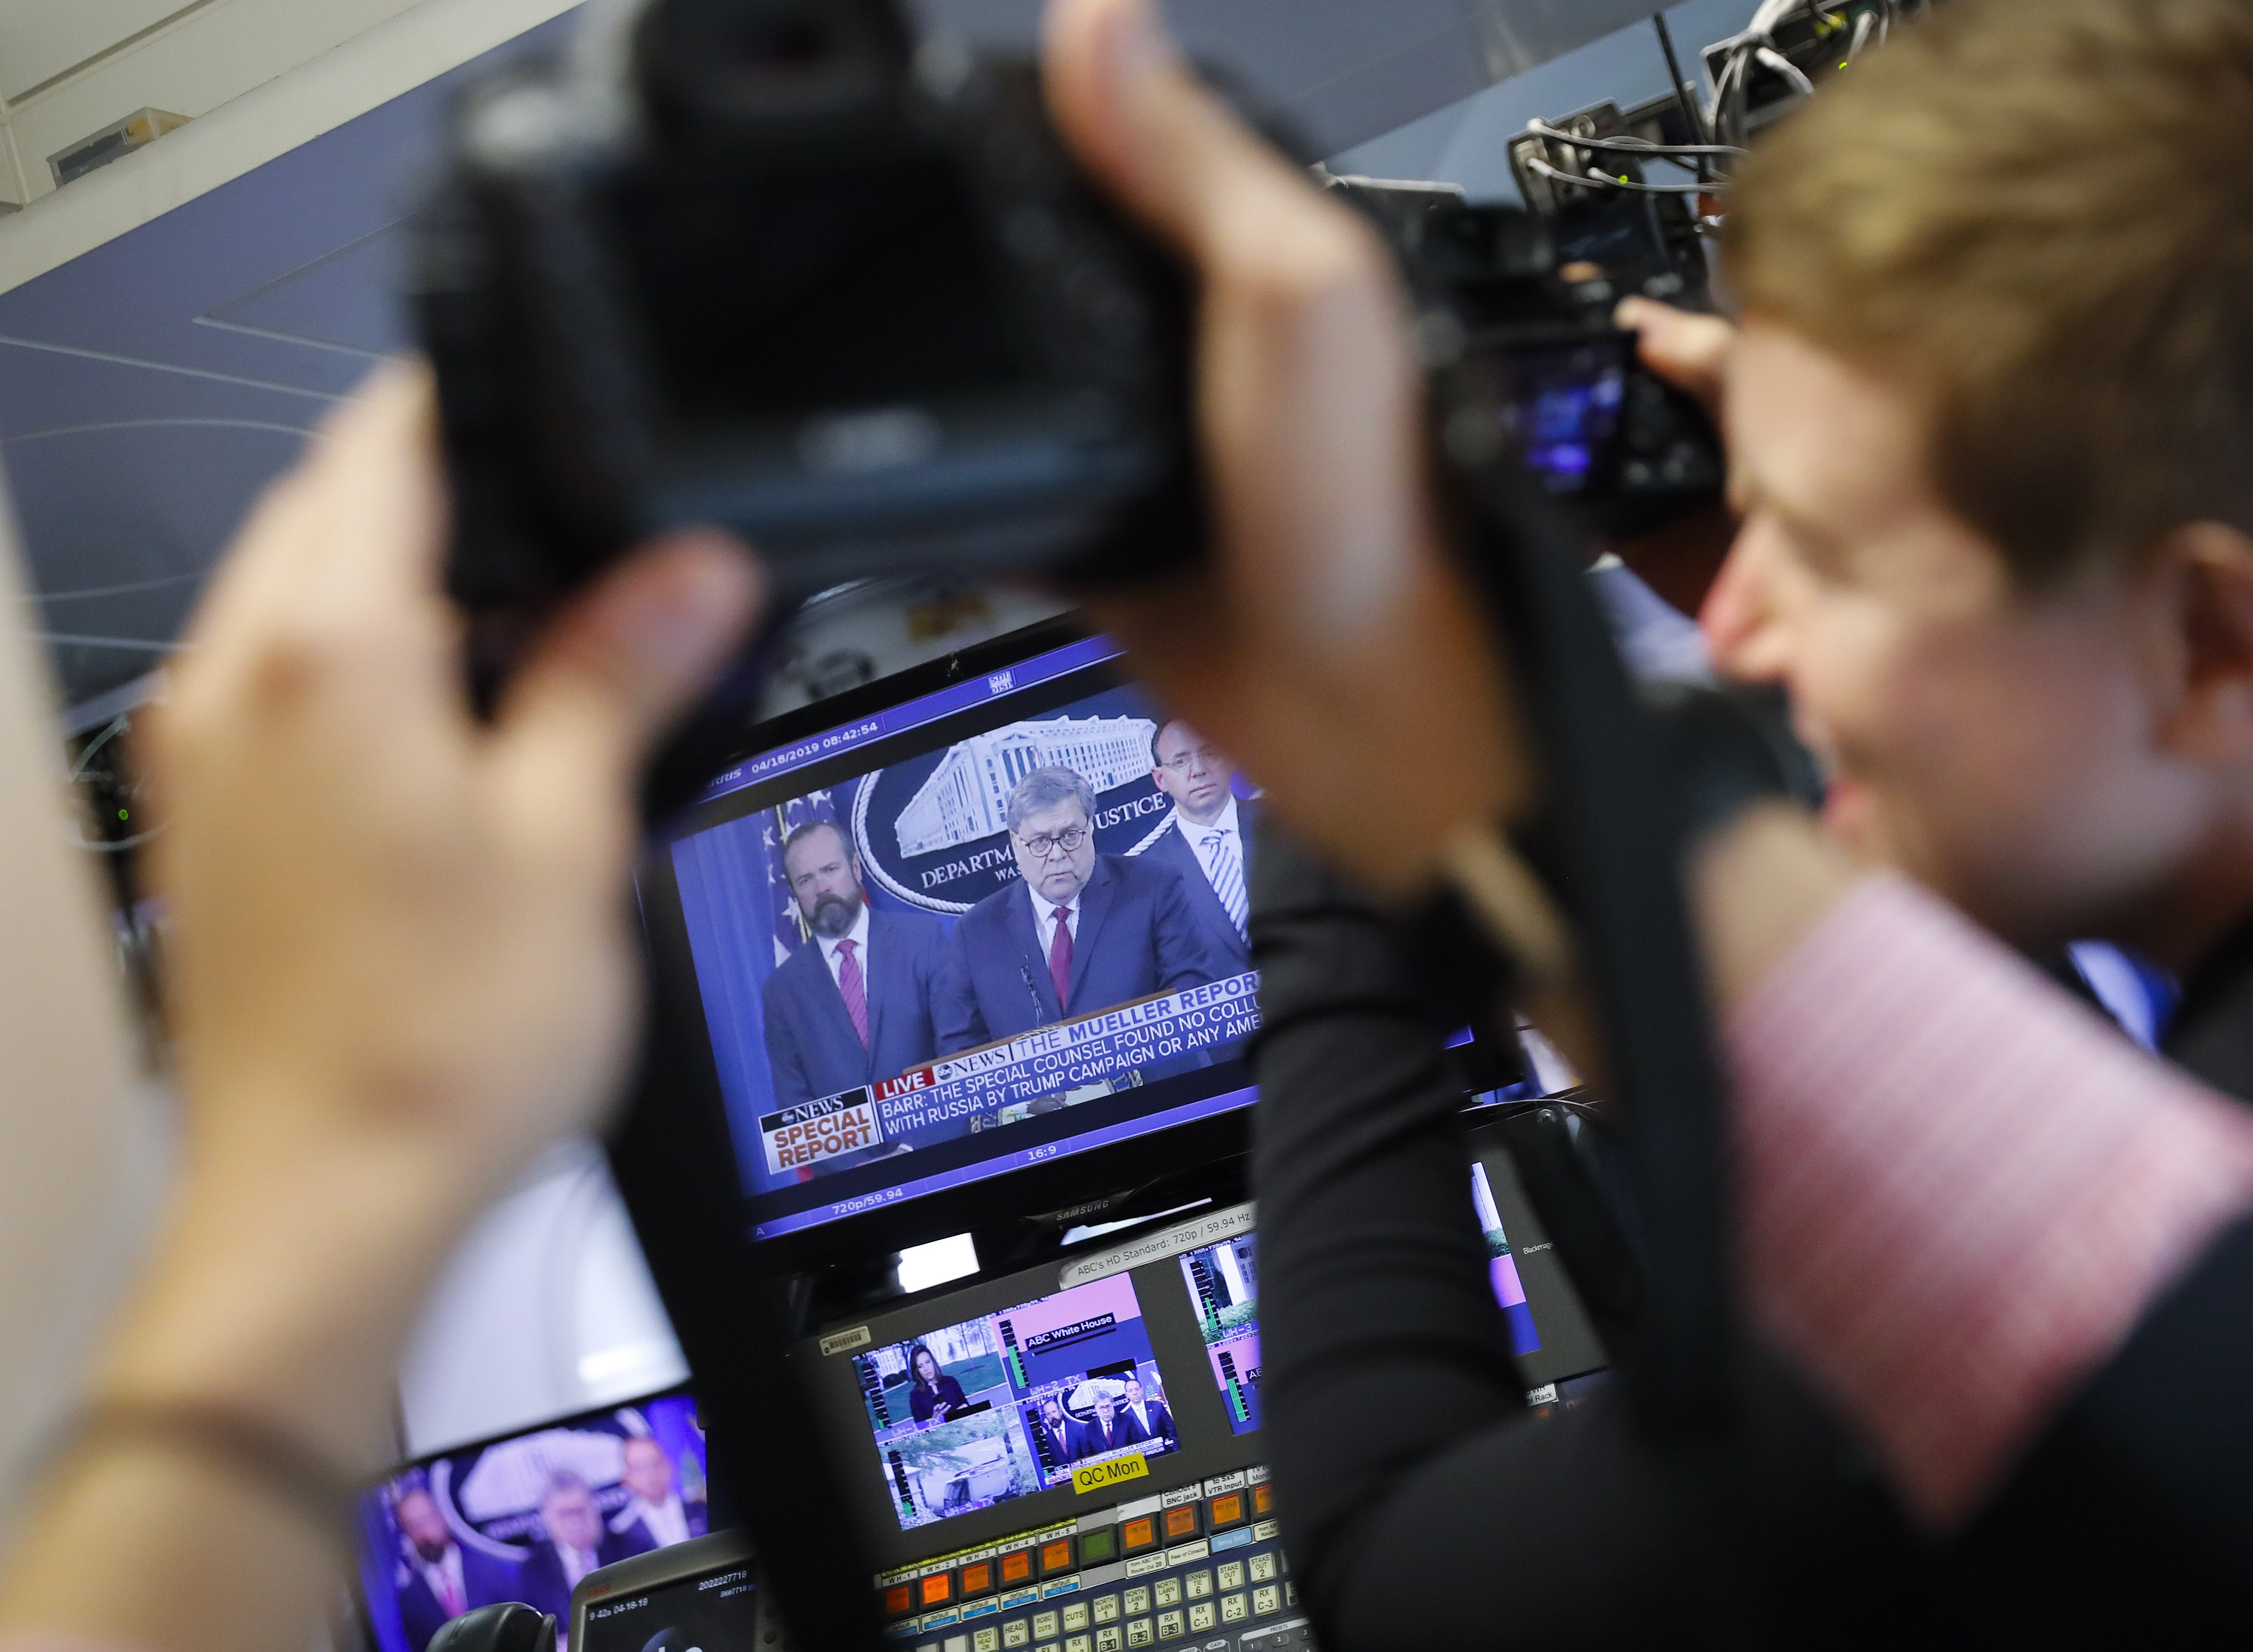 Journalists take photographs of the television broadcast monitors in the press room of the White House in Washington of Attorney General William Barr speaks alongside Deputy Attorney General Rod Rosenstein, right, and Deputy Attorney General Ed O'Callaghan, rear left, about the release of a redacted version of special counsel Robert Mueller's report April 18, 2019, Thursday, April 18, 2019, in Washington.